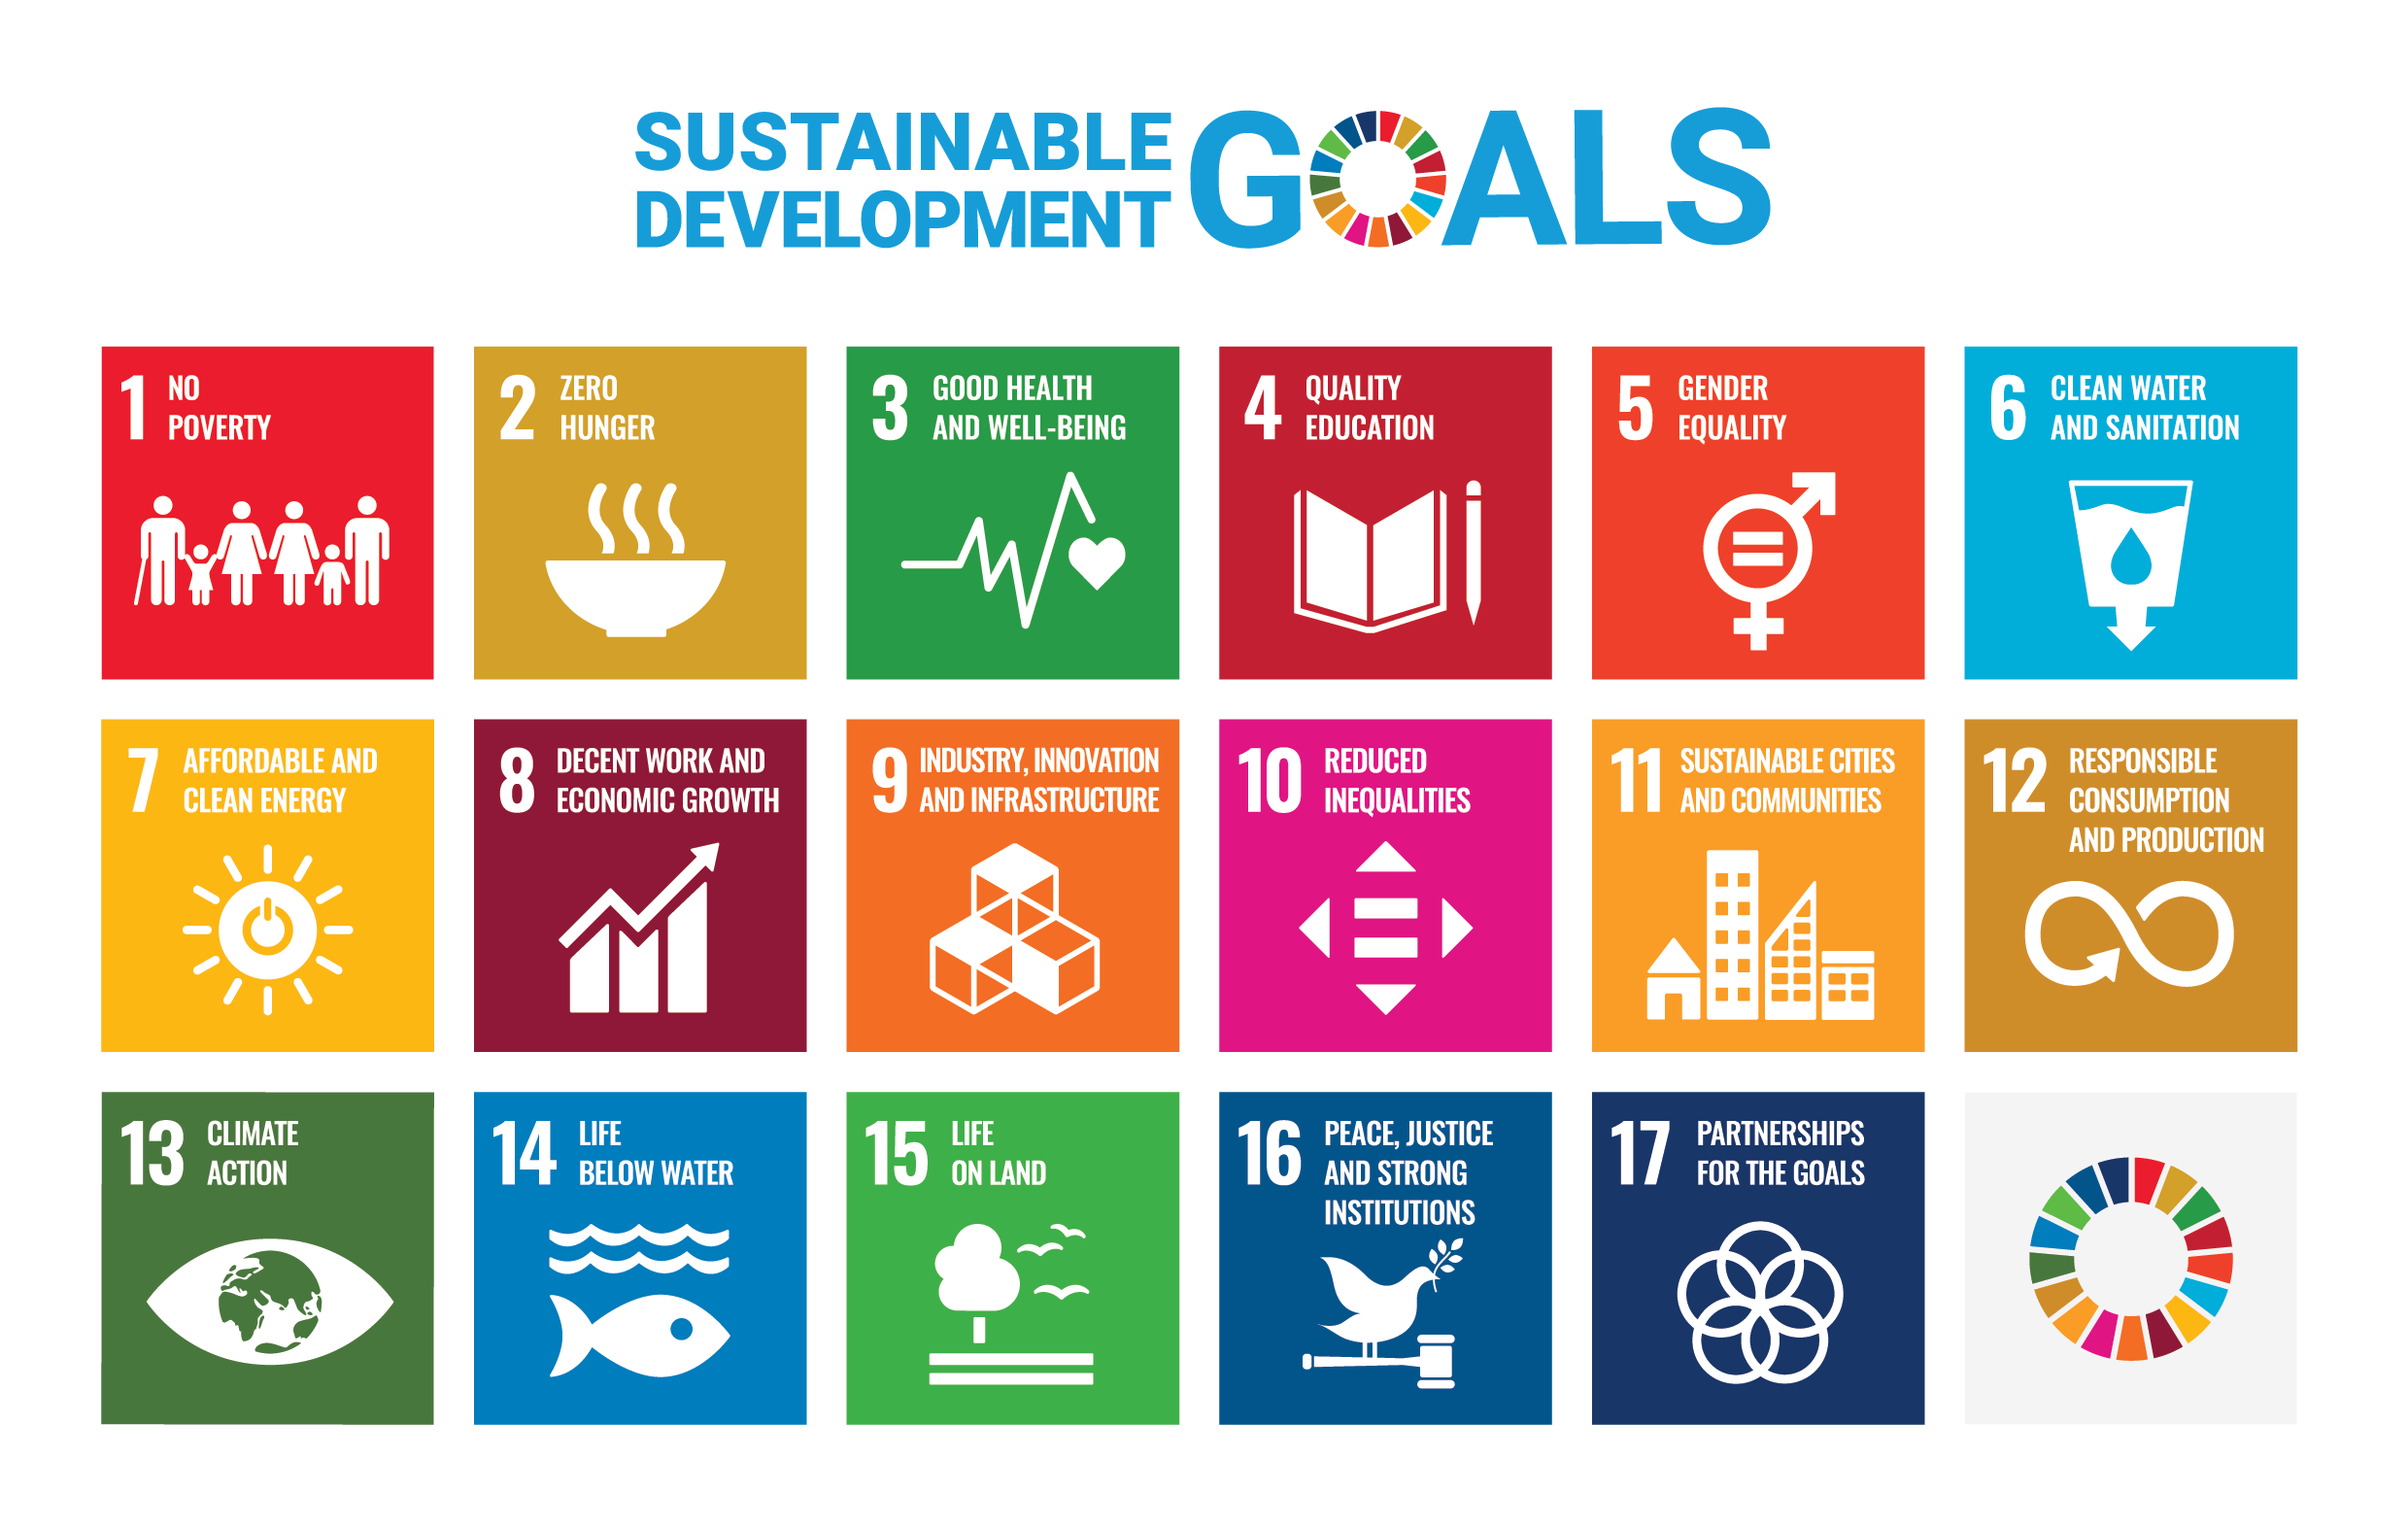 A graphic table displaying the UN's 17 Sustainable Goals goals